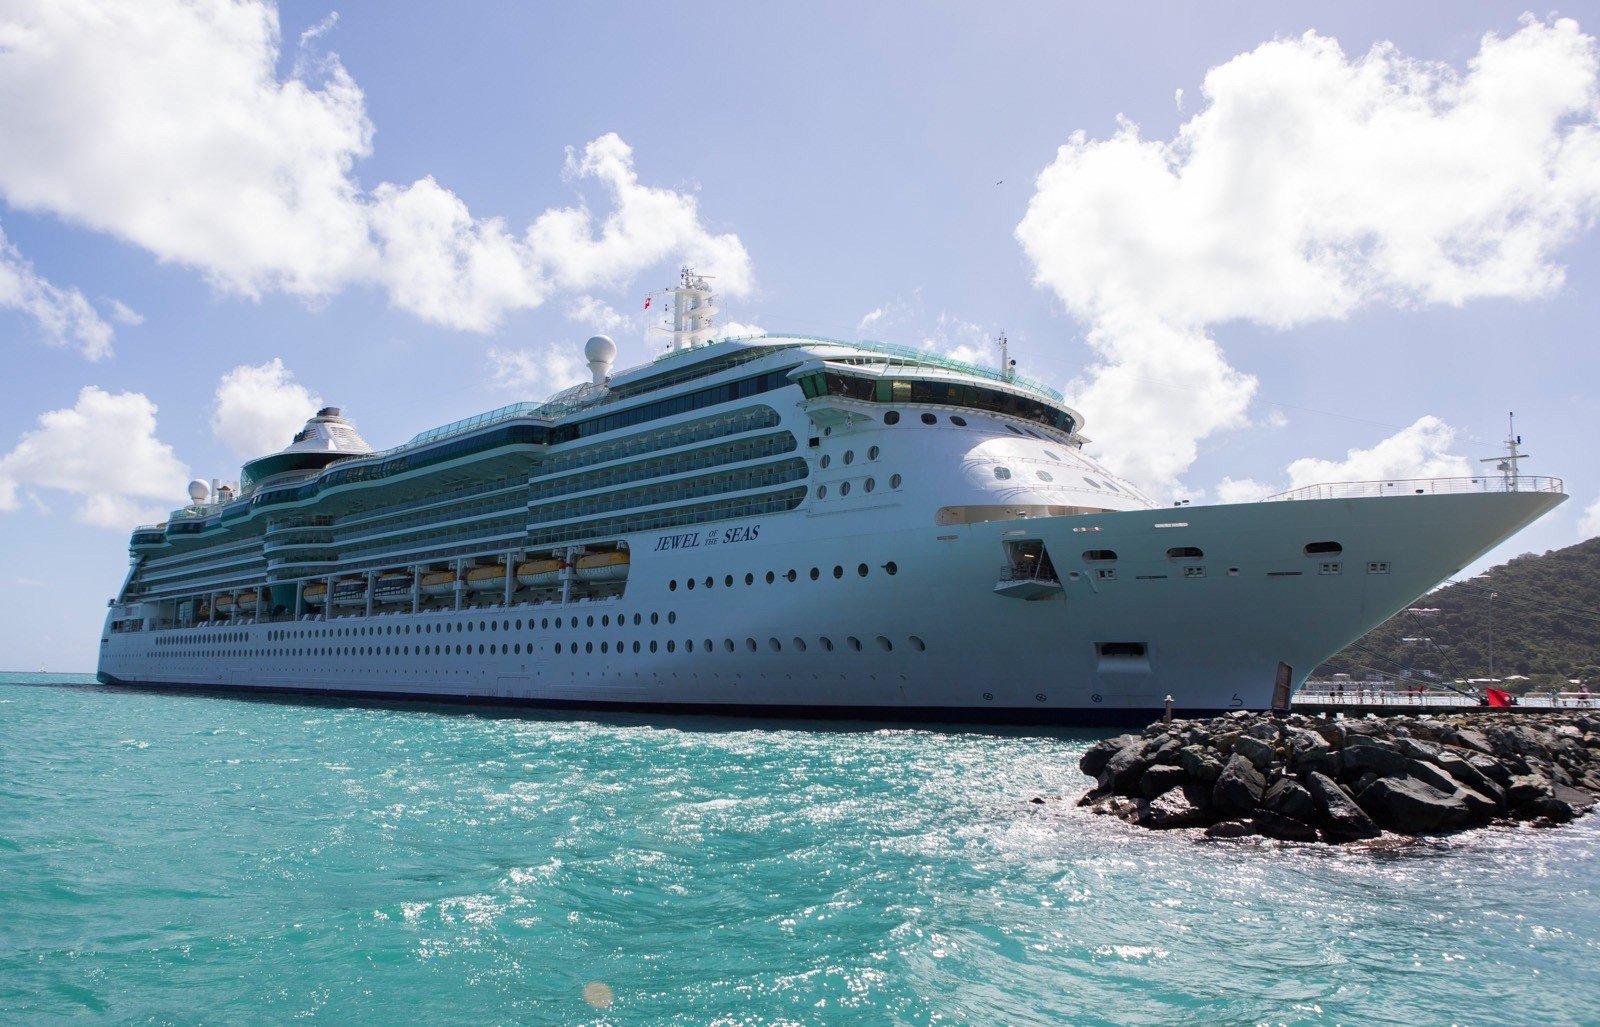 Jewel of the Seas will sail from Cyprus in July | Royal Caribbean Blog